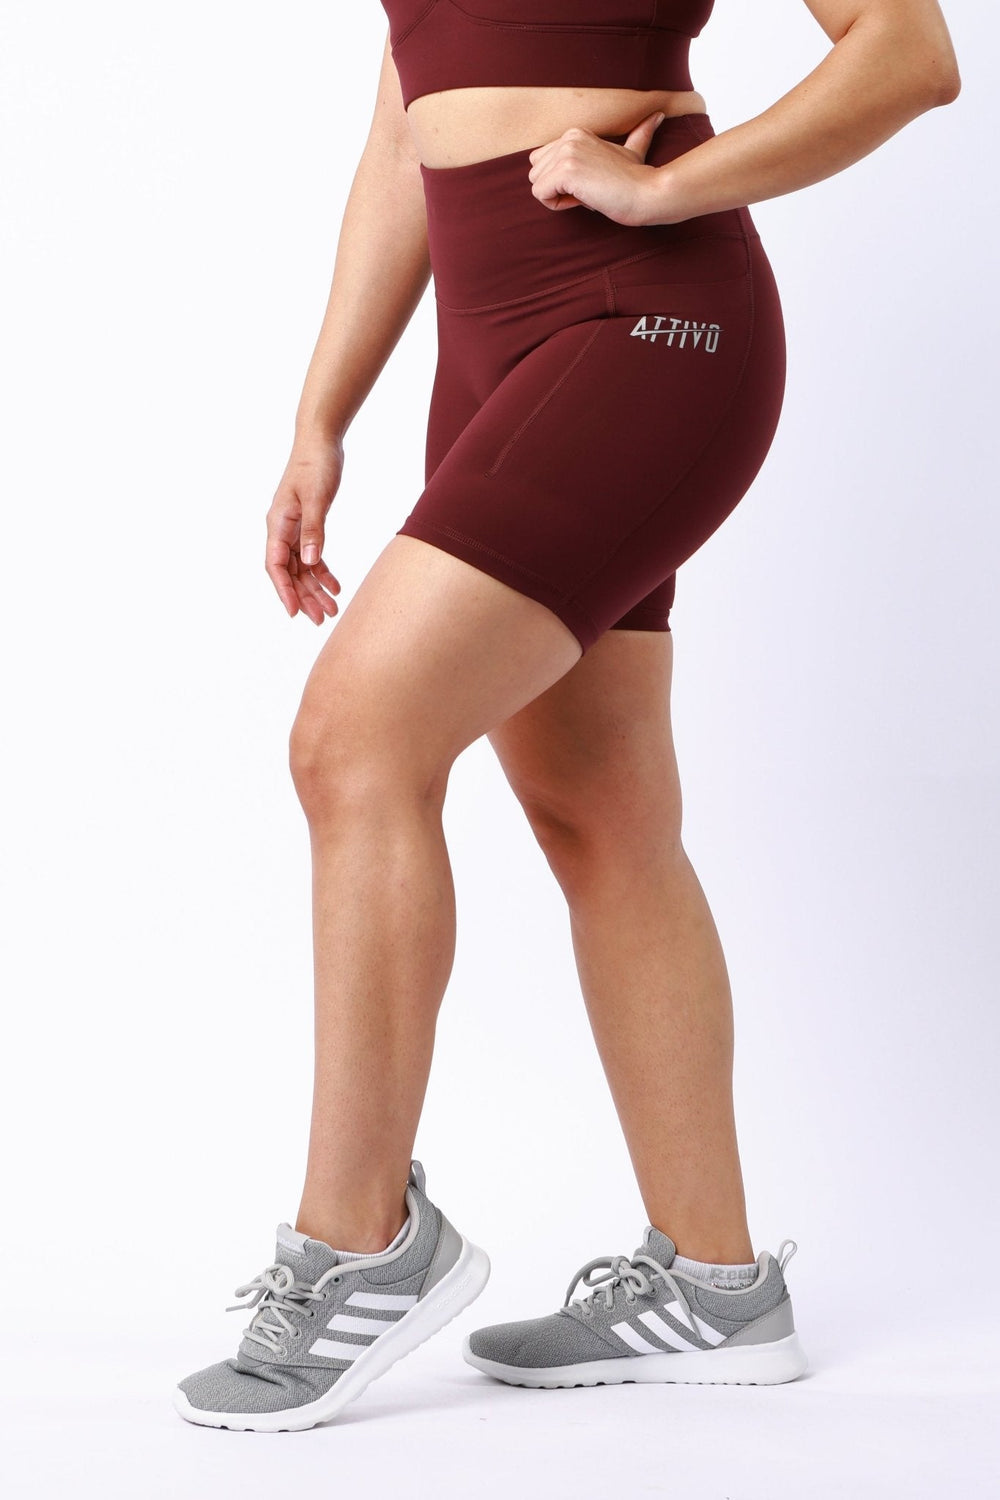 Athletic Women's Shorts With Pockets In Winetasting - attivousa Free Shipping over $75 Womens Activewear Attivo